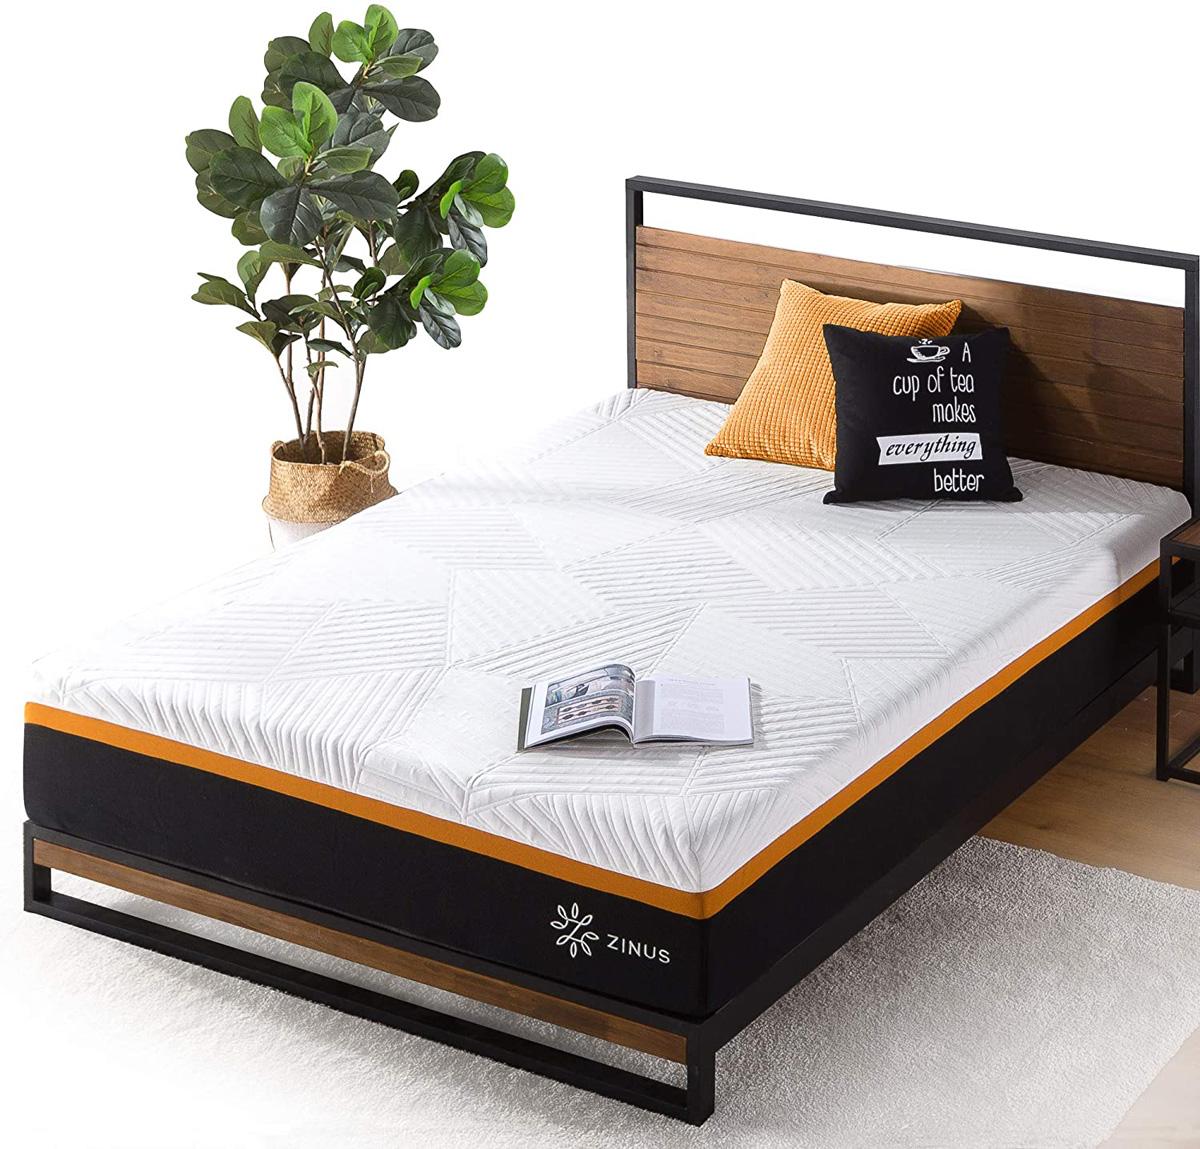 Zinus 12in Cooling Copper Spring Hybrid Mattress for $379 Shipped